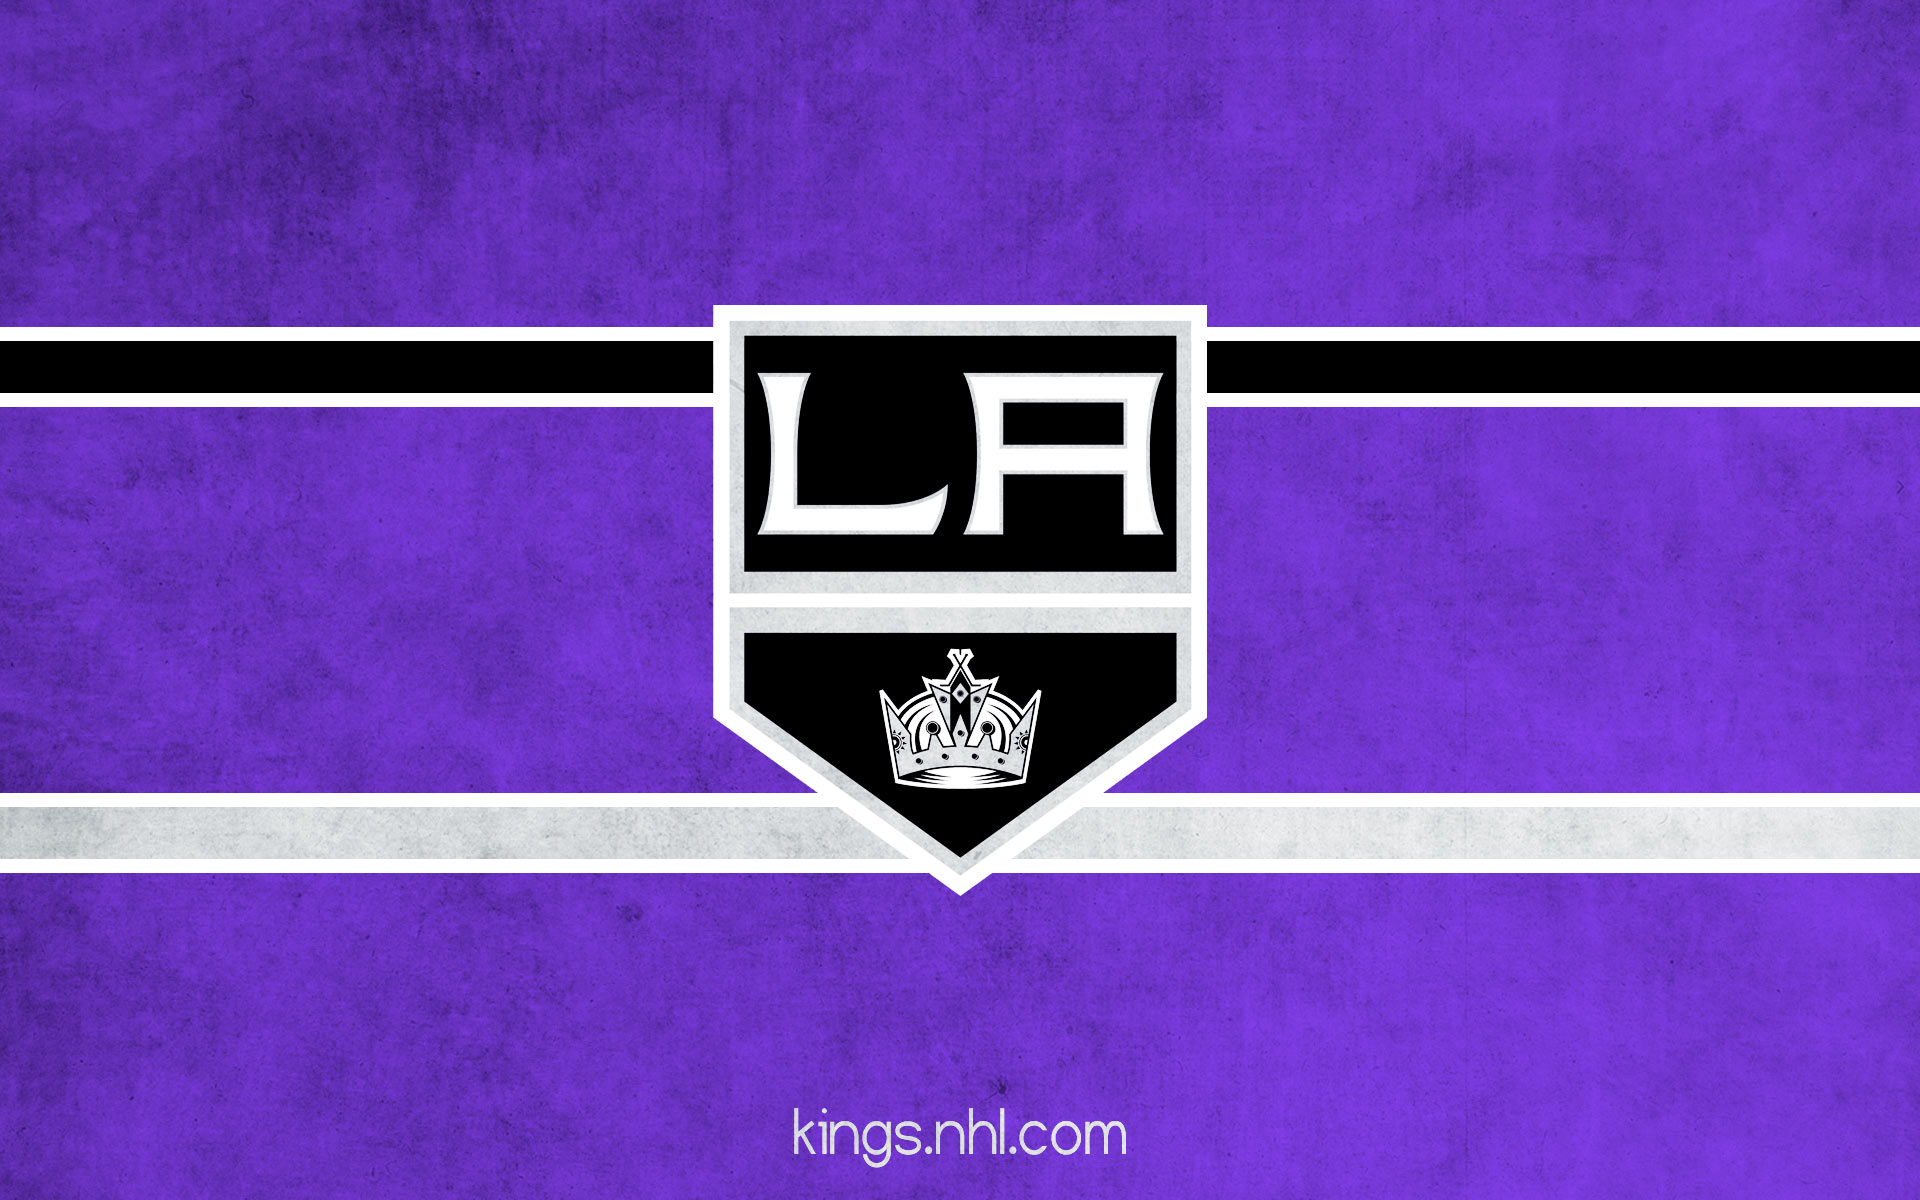 Los Angeles Kings Wallpaper Madebybrian Wp Admin Includes